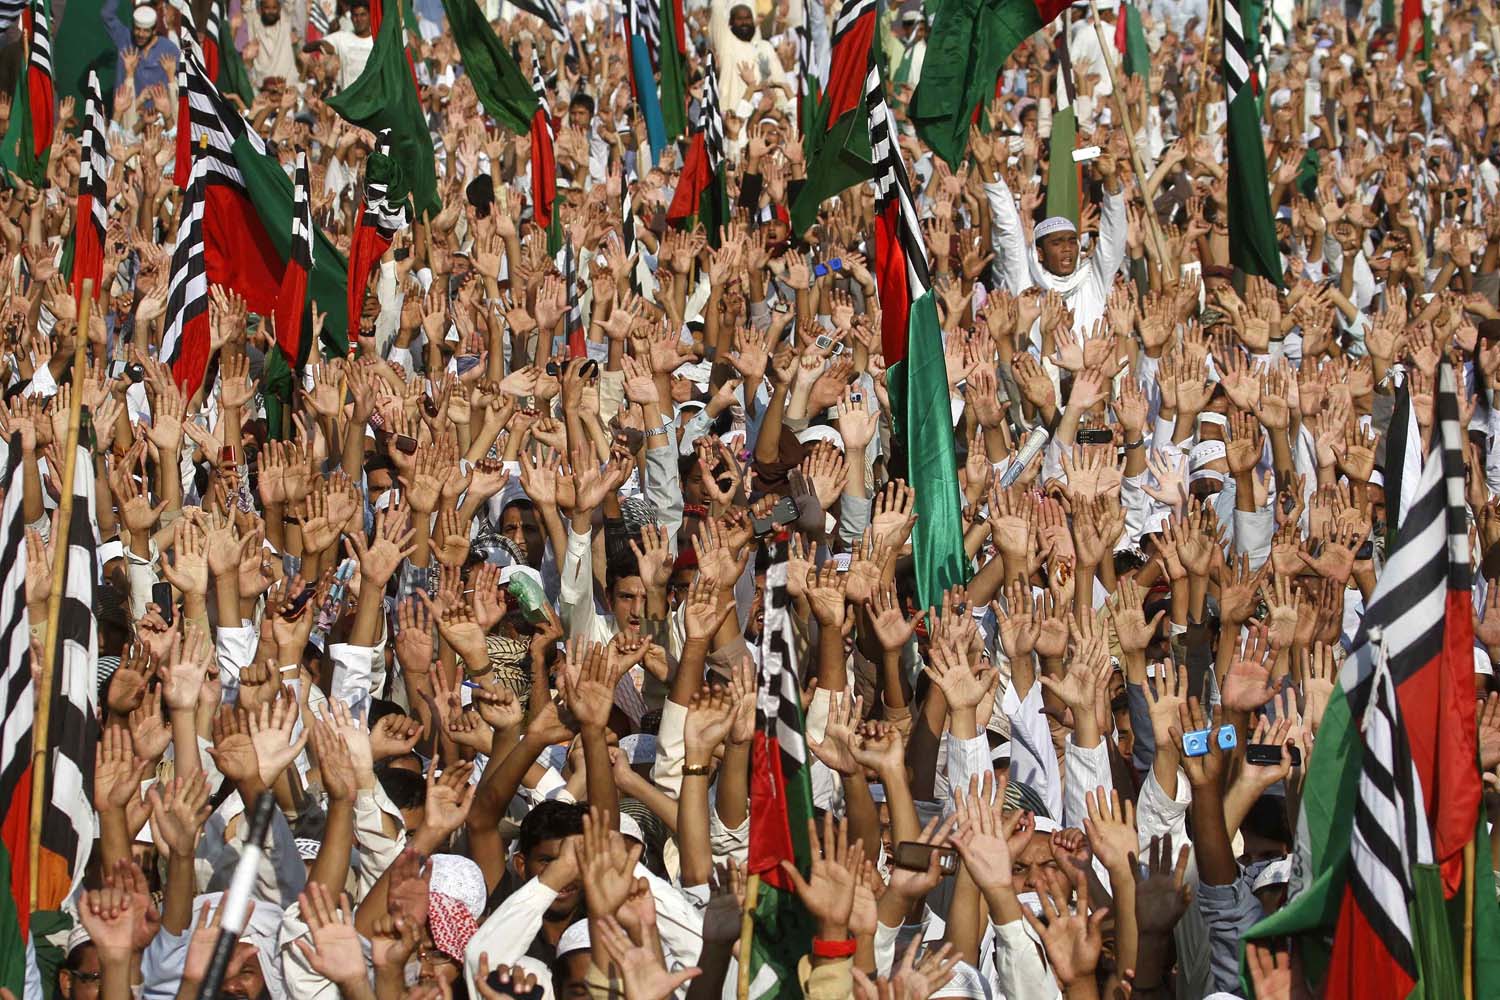 Supporters of ASWJ raise their hands during a protest in Karachi